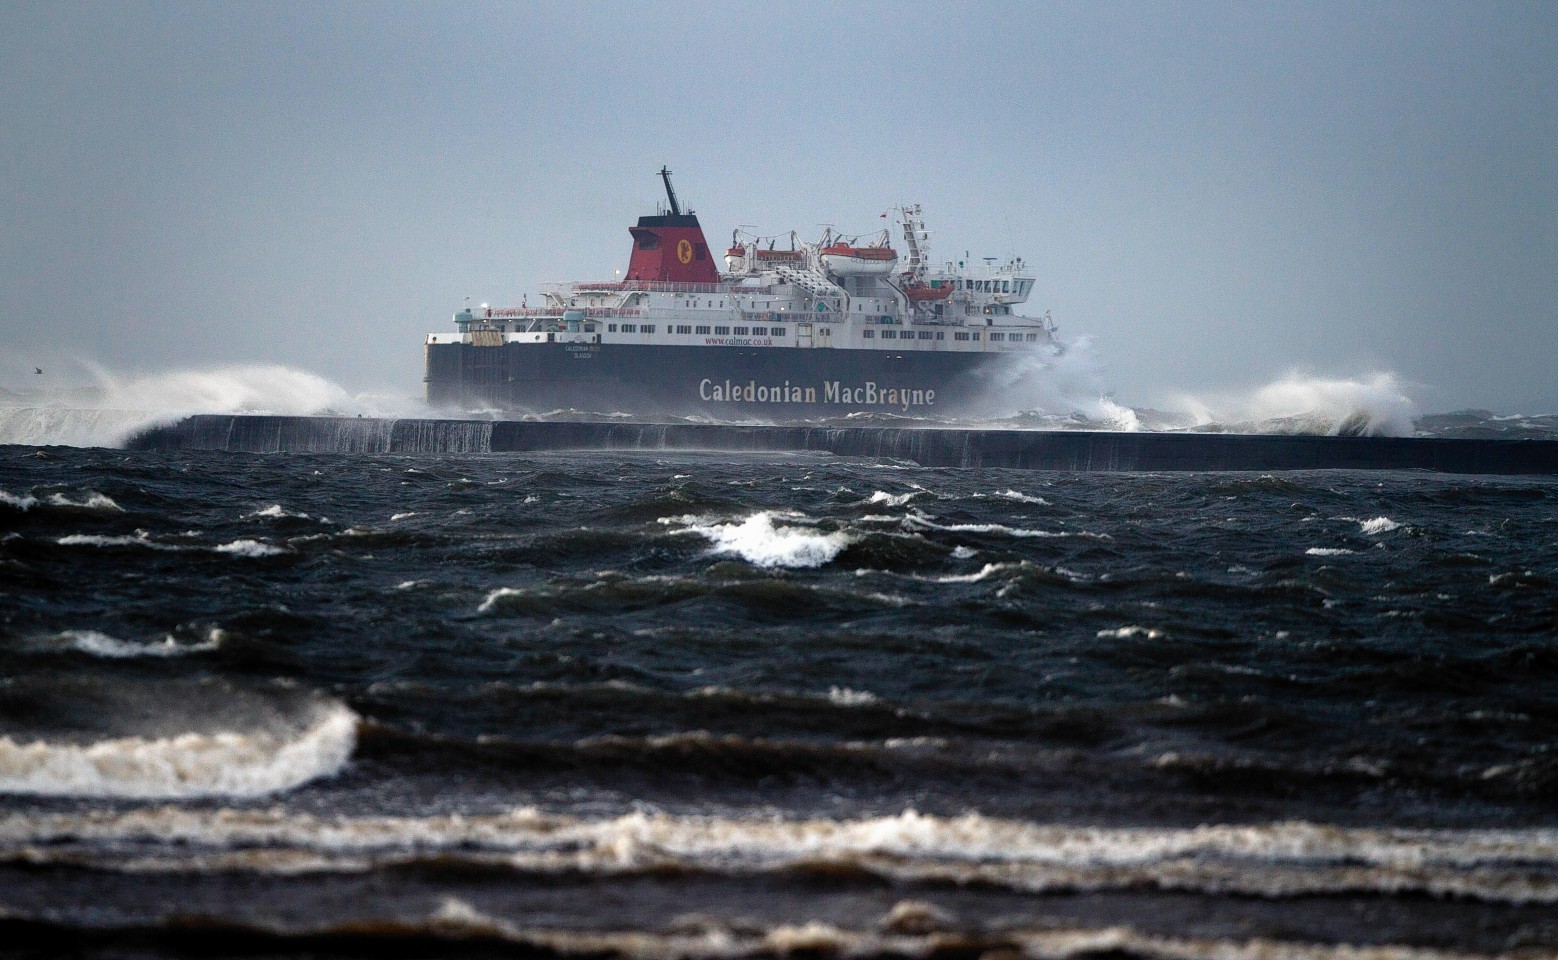 Ferries have been cancelled today